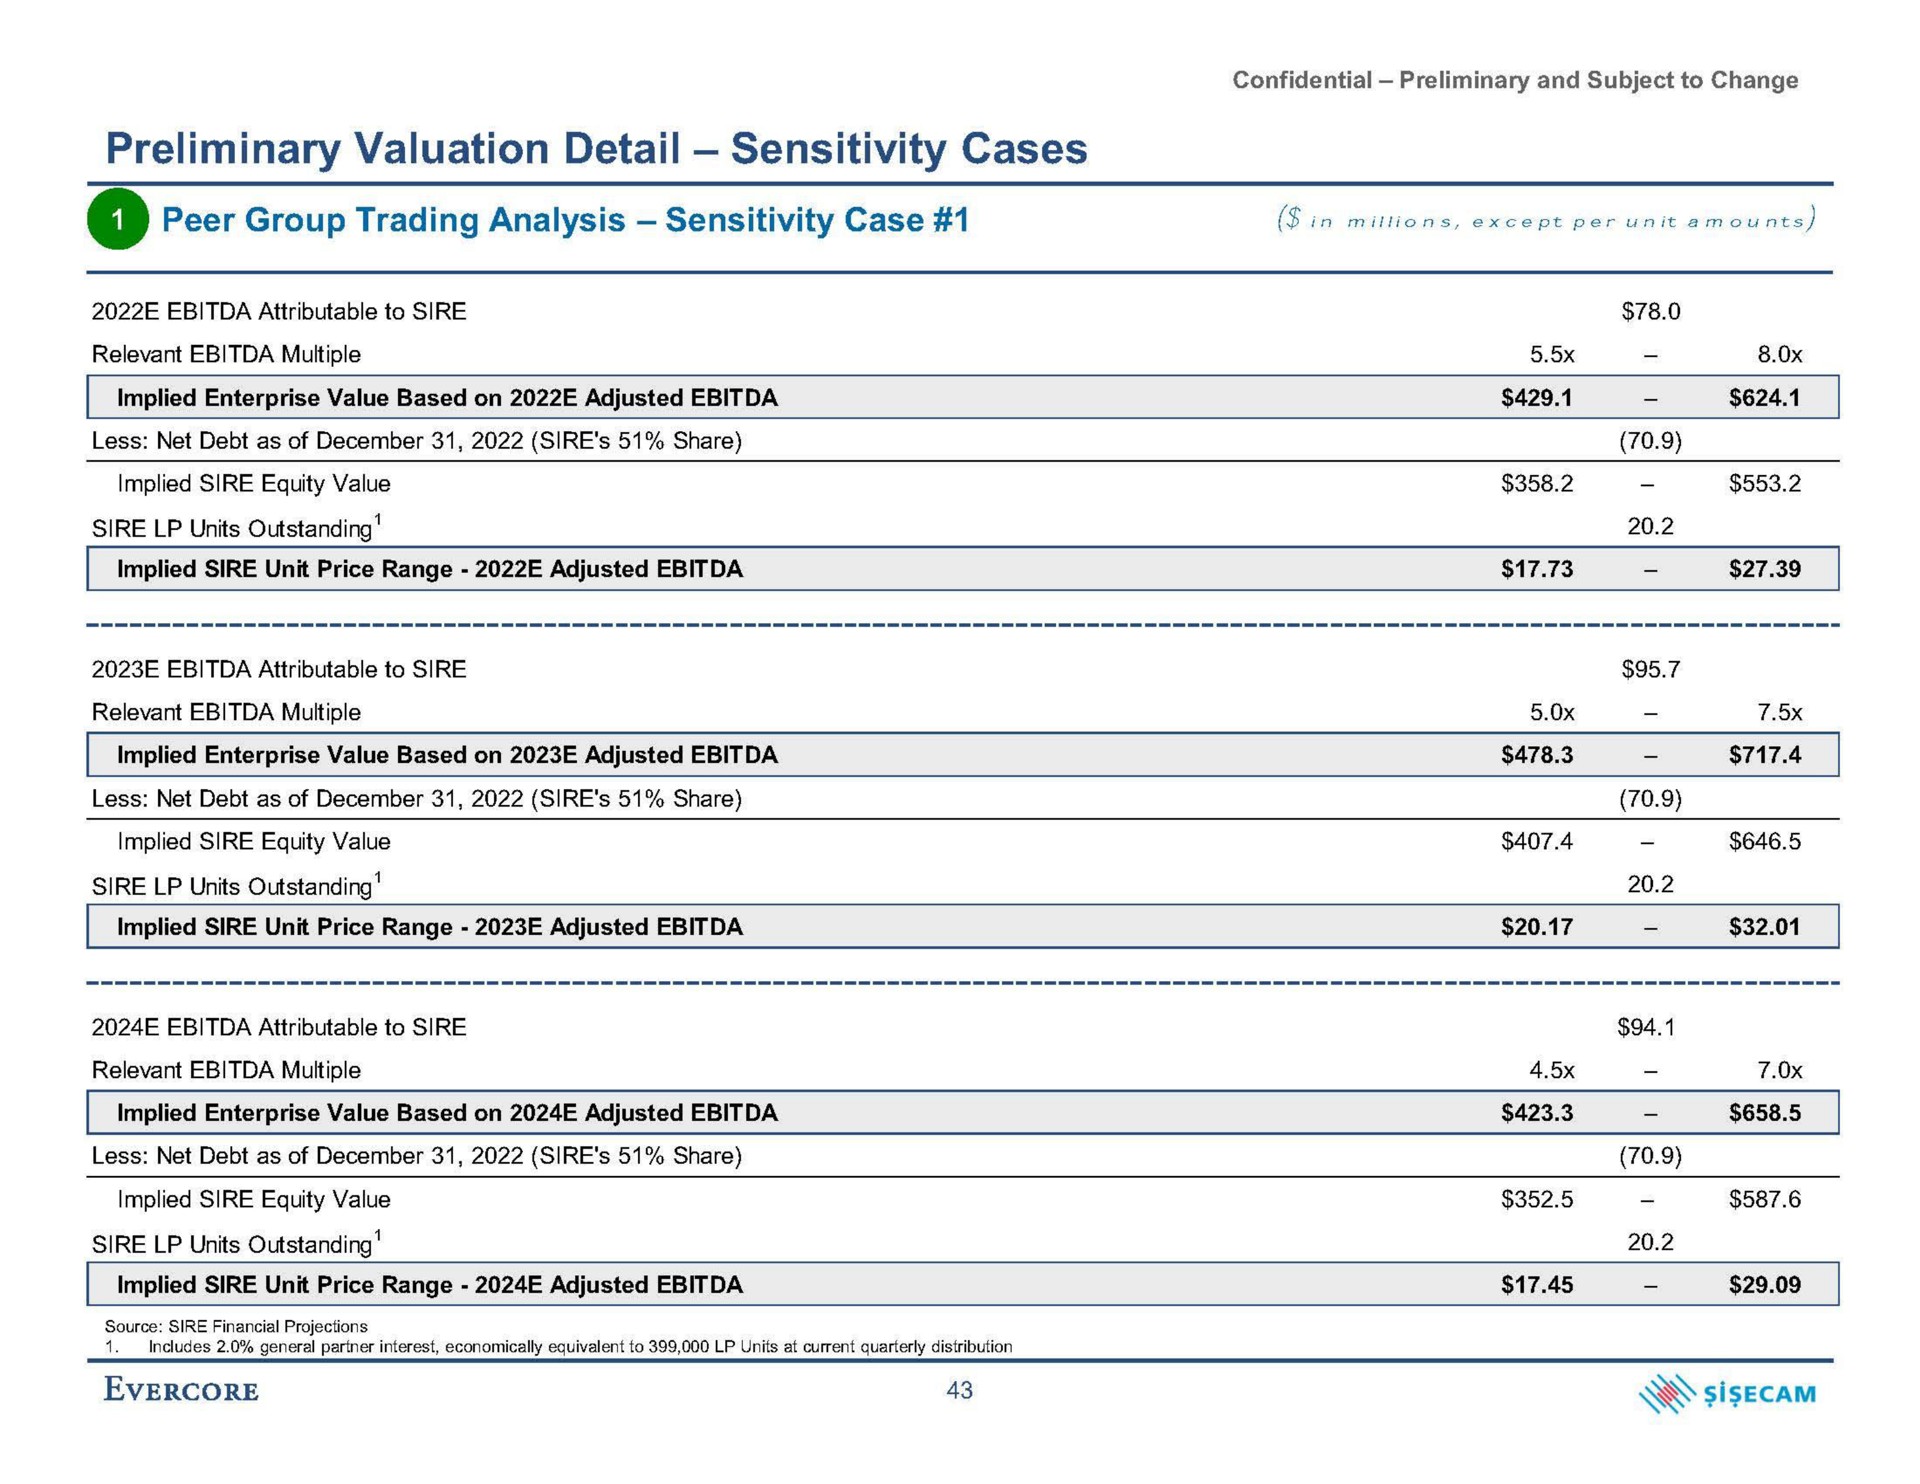 preliminary valuation detail sensitivity cases peer group trading analysis sensitivity case in except per unit amounts | Evercore